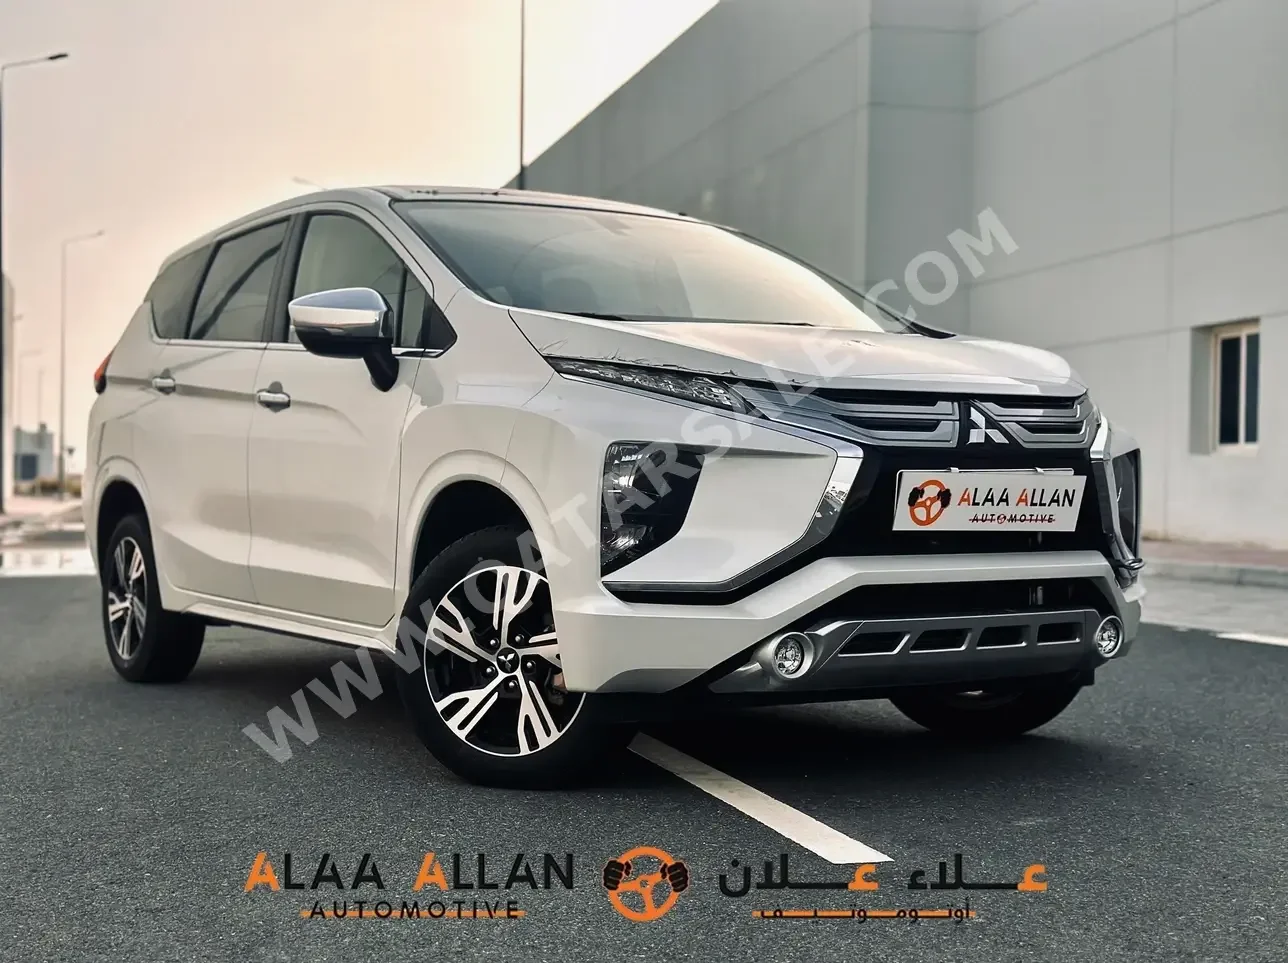 Mitsubishi  Xpander  2022  Automatic  0 Km  4 Cylinder  Front Wheel Drive (FWD)  SUV  White  With Warranty